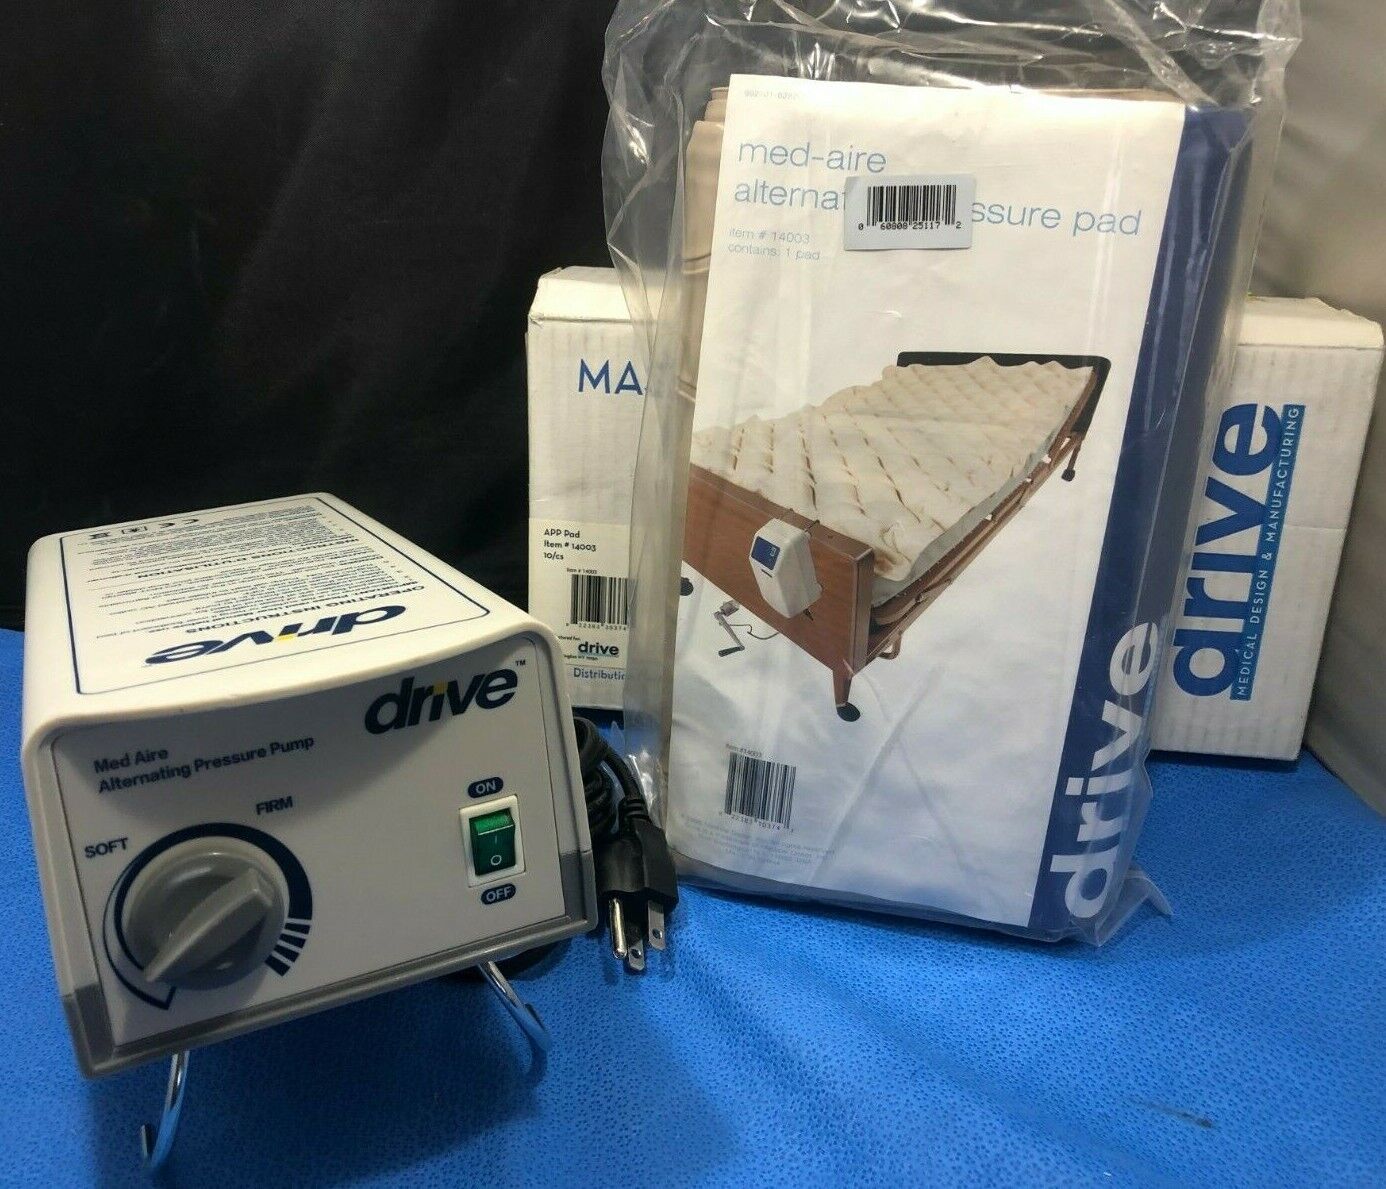 Drive Med Aire Alternating Pressure Pump Model 14005E With NEW 14003 Pad    kp